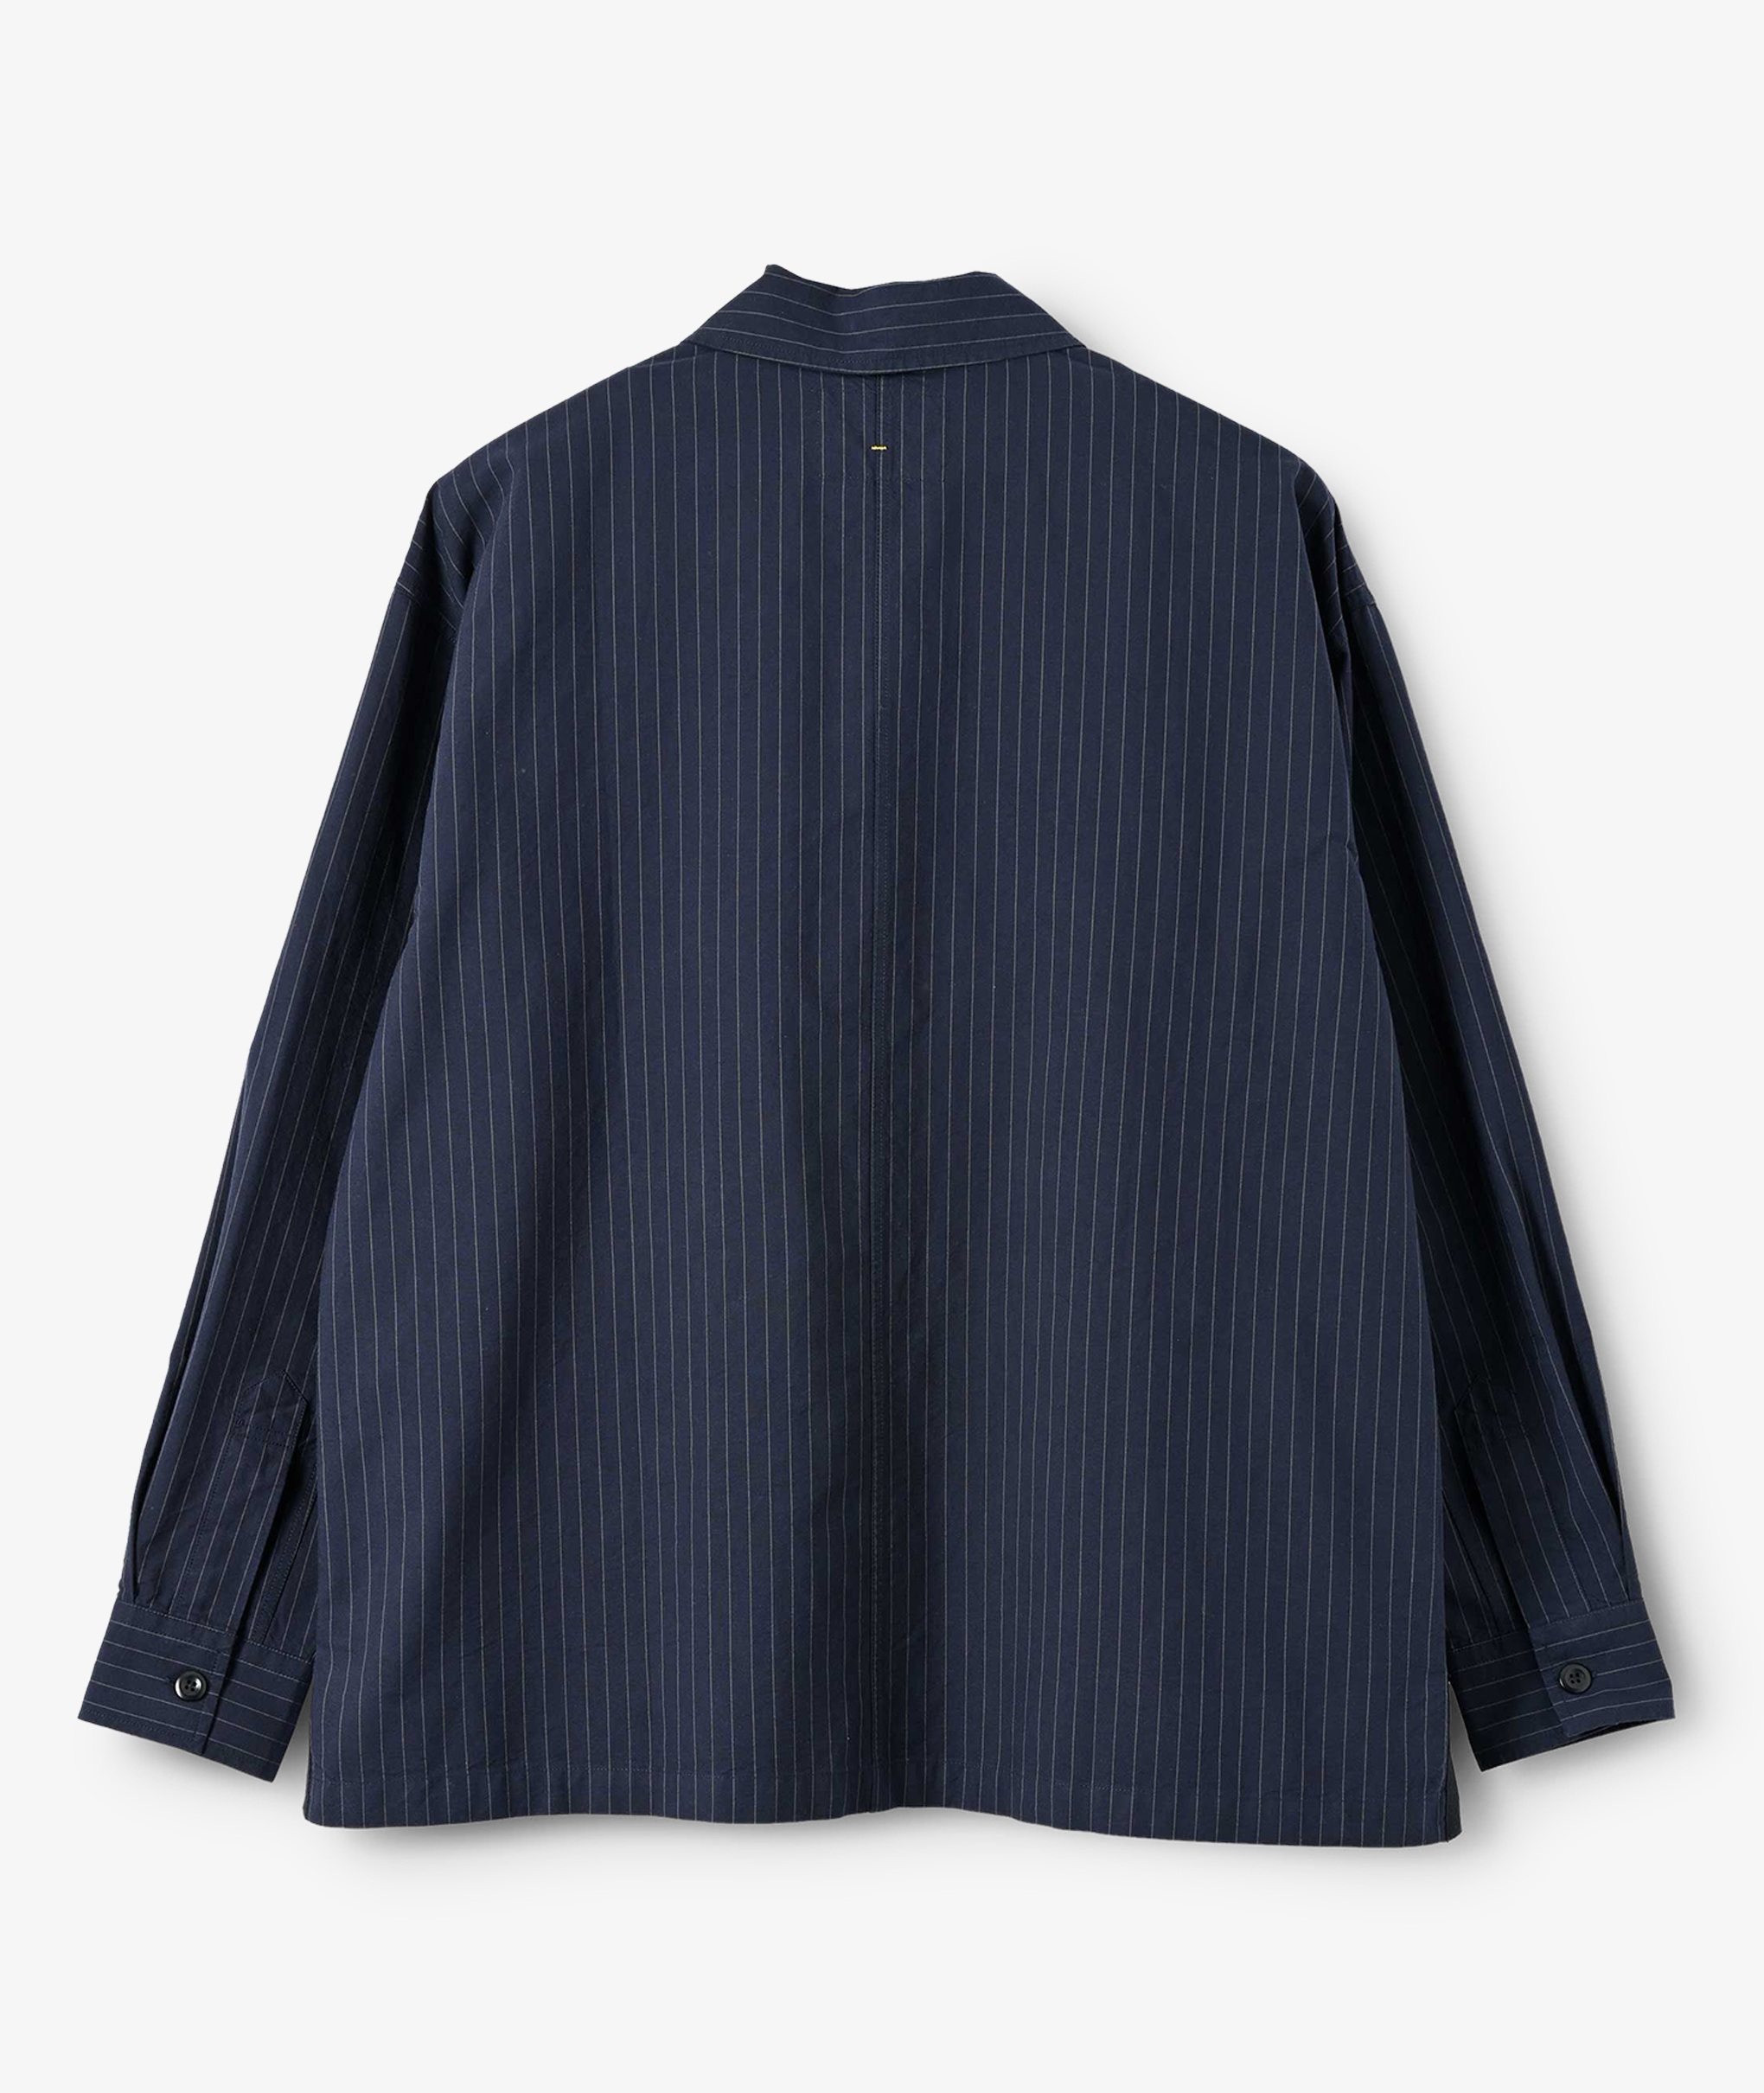 Norse Store | Shipping Worldwide - Margaret Howell MHL Simple Shirt ...